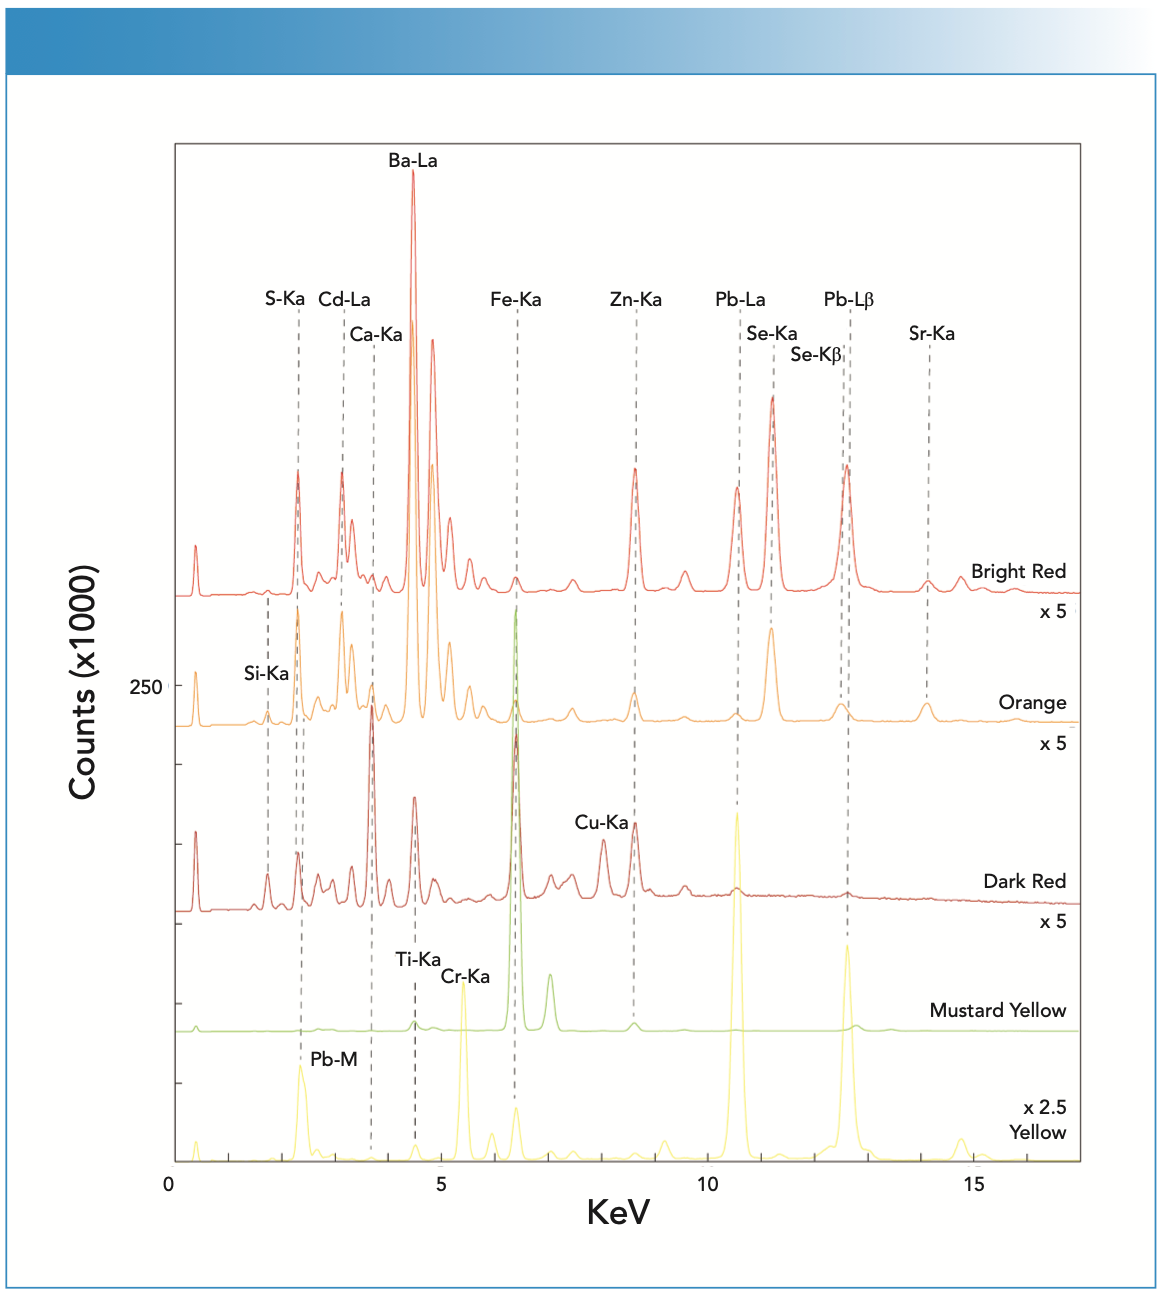 FIGURE 6: The X-ray fluorescence (XRF) spectra collected from the red, orange, and yellow pigments found on the workshop floor.